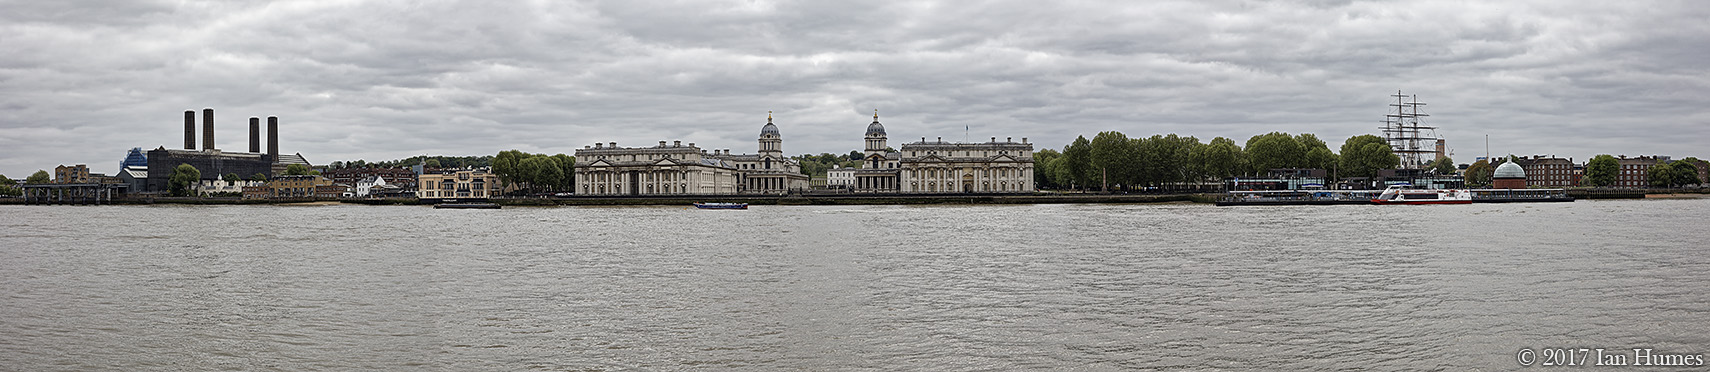 Wide-angle stitched panoramc photograph from Island Gardens of Greenwich Maritime World Heritage Site. LVMF 24a2 - Island Gardens